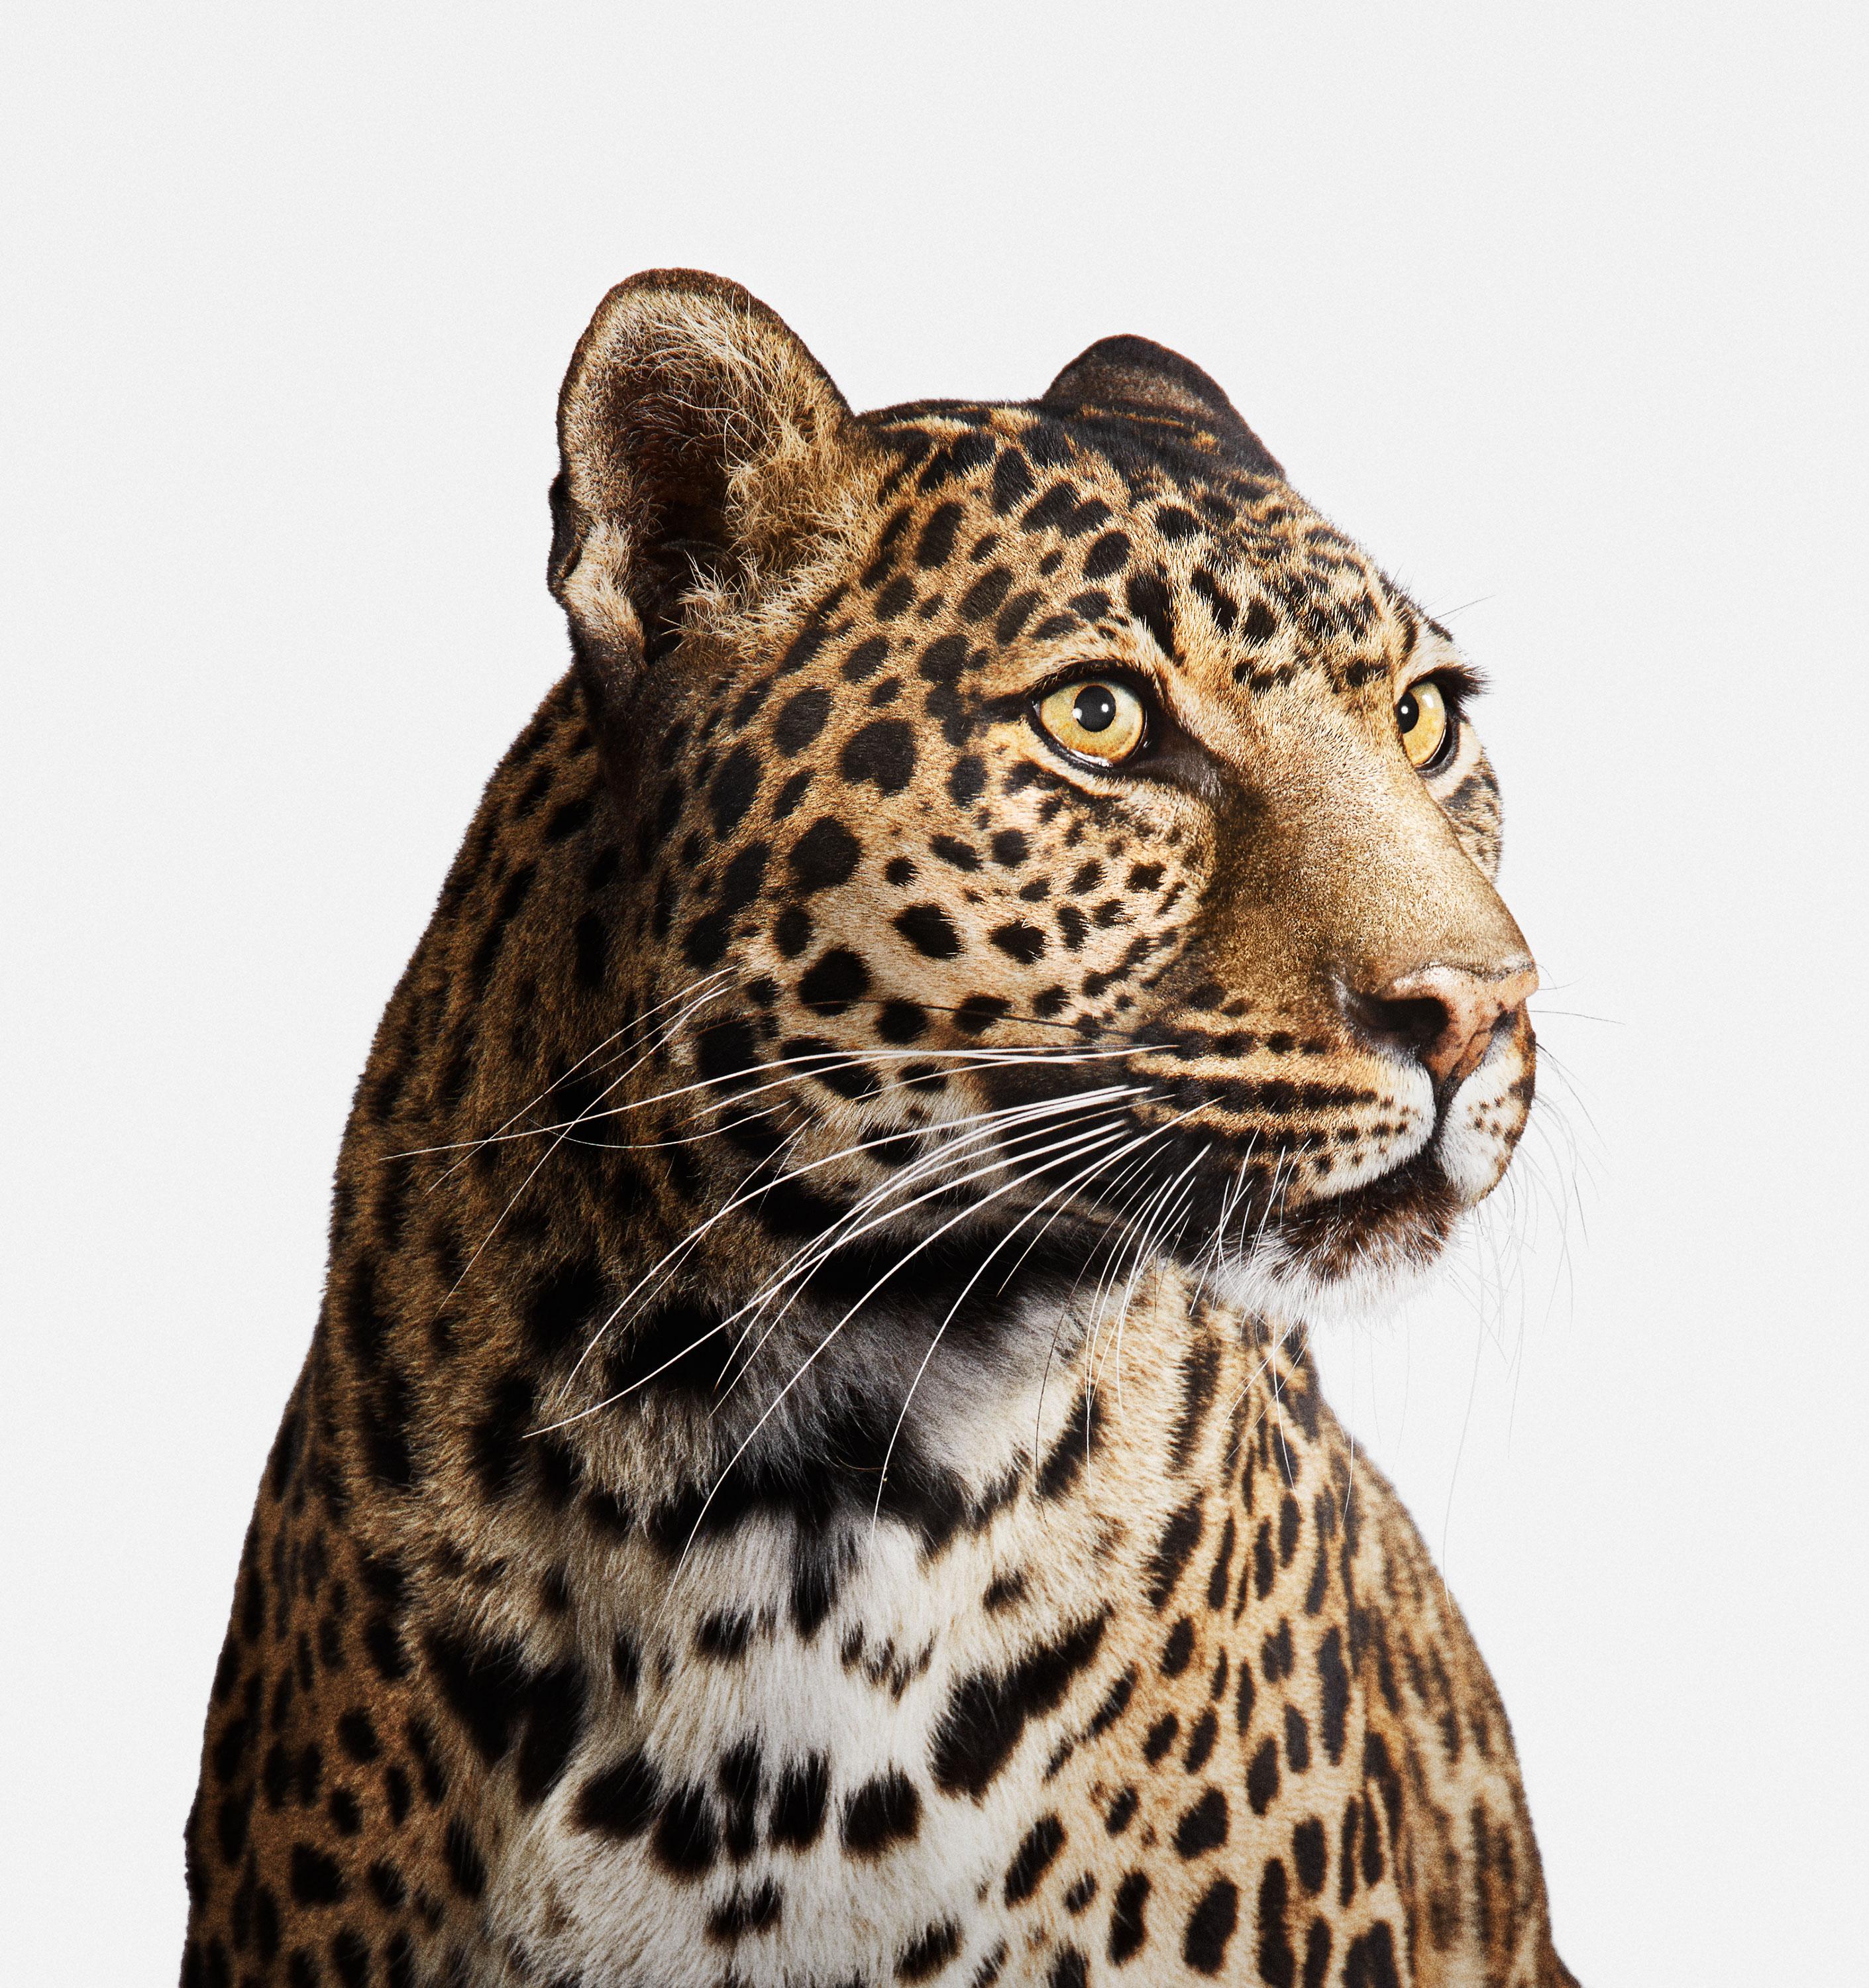 Randal Ford Animal Print - Spotted Leopard No. 2 (40" x 50")